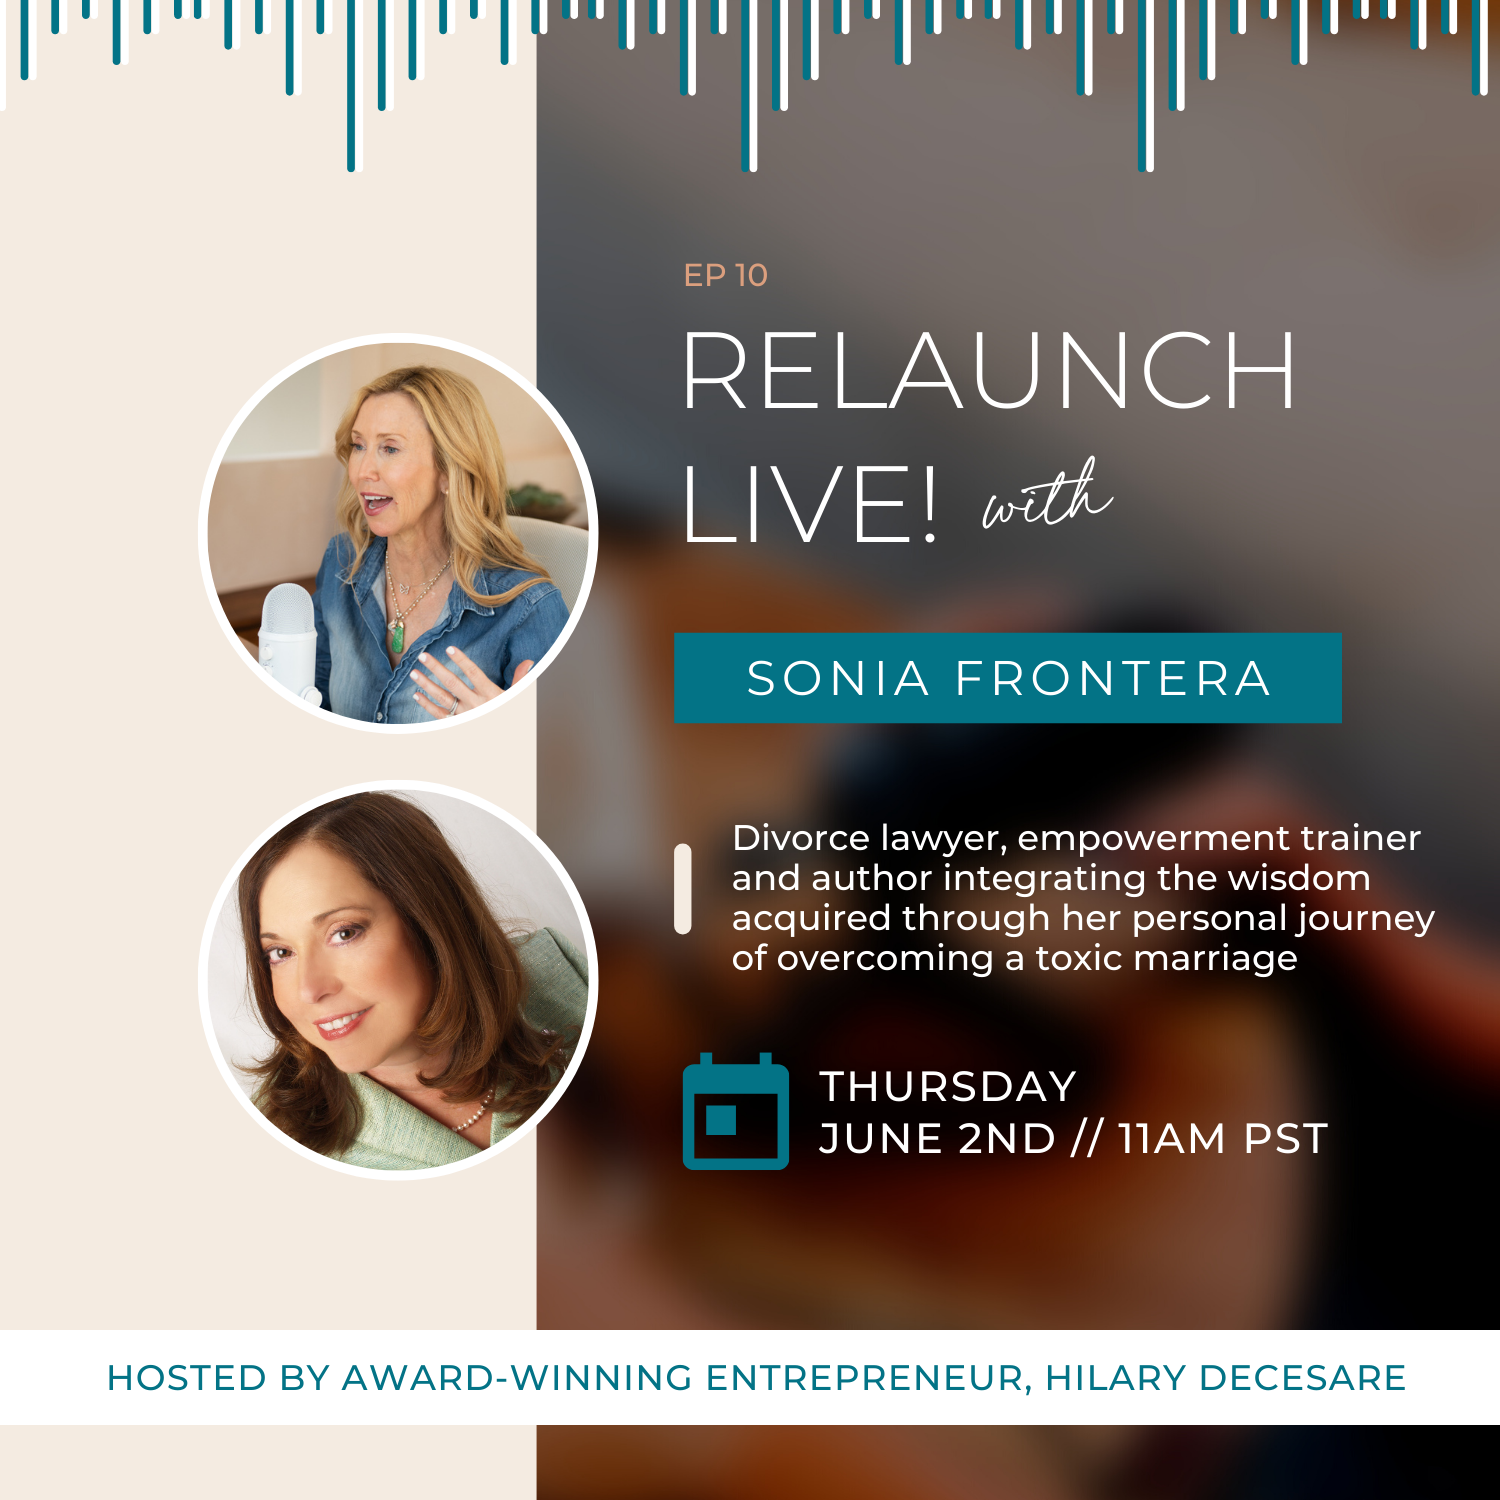 promo graphic of Relaunch live with Hilary Decesare Radio show featuring divorce lawyer Sonia Frontera